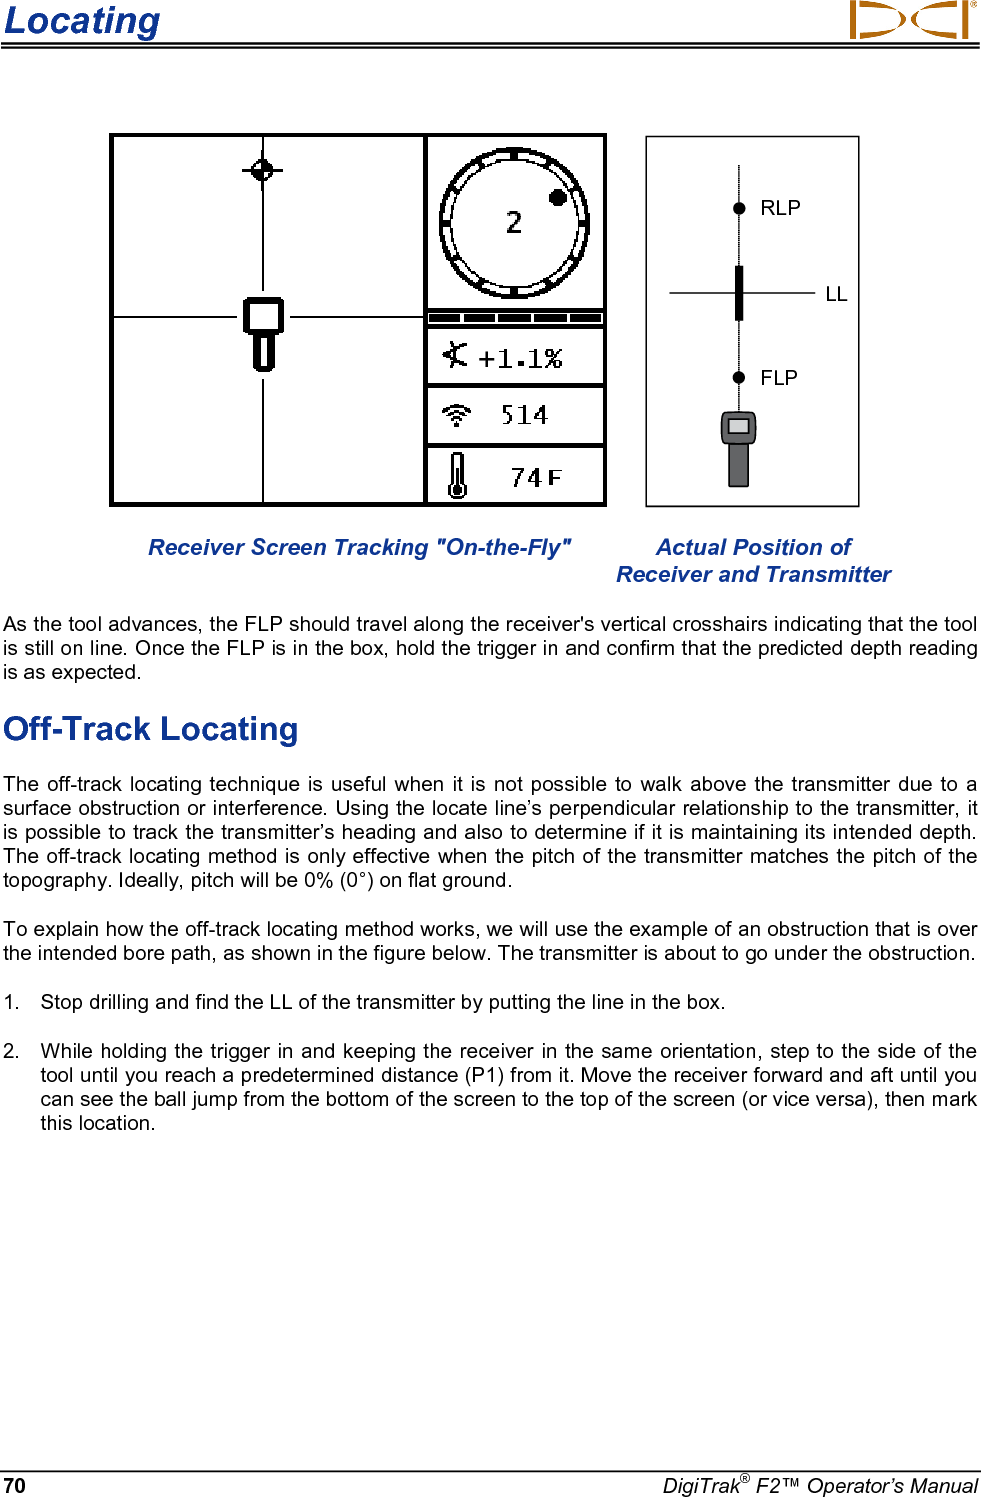 Locating     70 DigiTrak® F2™ Operator’s Manual    RLPFLPLL  Receiver Screen Tracking &quot;On-the-Fly&quot; Actual Position of        Receiver and Transmitter As the tool advances, the FLP should travel along the receiver&apos;s vertical crosshairs indicating that the tool is still on line. Once the FLP is in the box, hold the trigger in and confirm that the predicted depth reading is as expected. Off-Track Locating The off-track locating technique is useful when it is not possible to walk above the transmitter due to a surface obstruction or interference. Using the locate line’s perpendicular relationship to the transmitter, it is possible to track the transmitter’s heading and also to determine if it is maintaining its intended depth. The off-track locating method is only effective when the pitch of the transmitter matches the pitch of the topography. Ideally, pitch will be 0% (0°) on flat ground. To explain how the off-track locating method works, we will use the example of an obstruction that is over the intended bore path, as shown in the figure below. The transmitter is about to go under the obstruction. 1. Stop drilling and find the LL of the transmitter by putting the line in the box. 2. While holding the trigger in and keeping the receiver in the same orientation, step to the side of the tool until you reach a predetermined distance (P1) from it. Move the receiver forward and aft until you can see the ball jump from the bottom of the screen to the top of the screen (or vice versa), then mark this location. + 